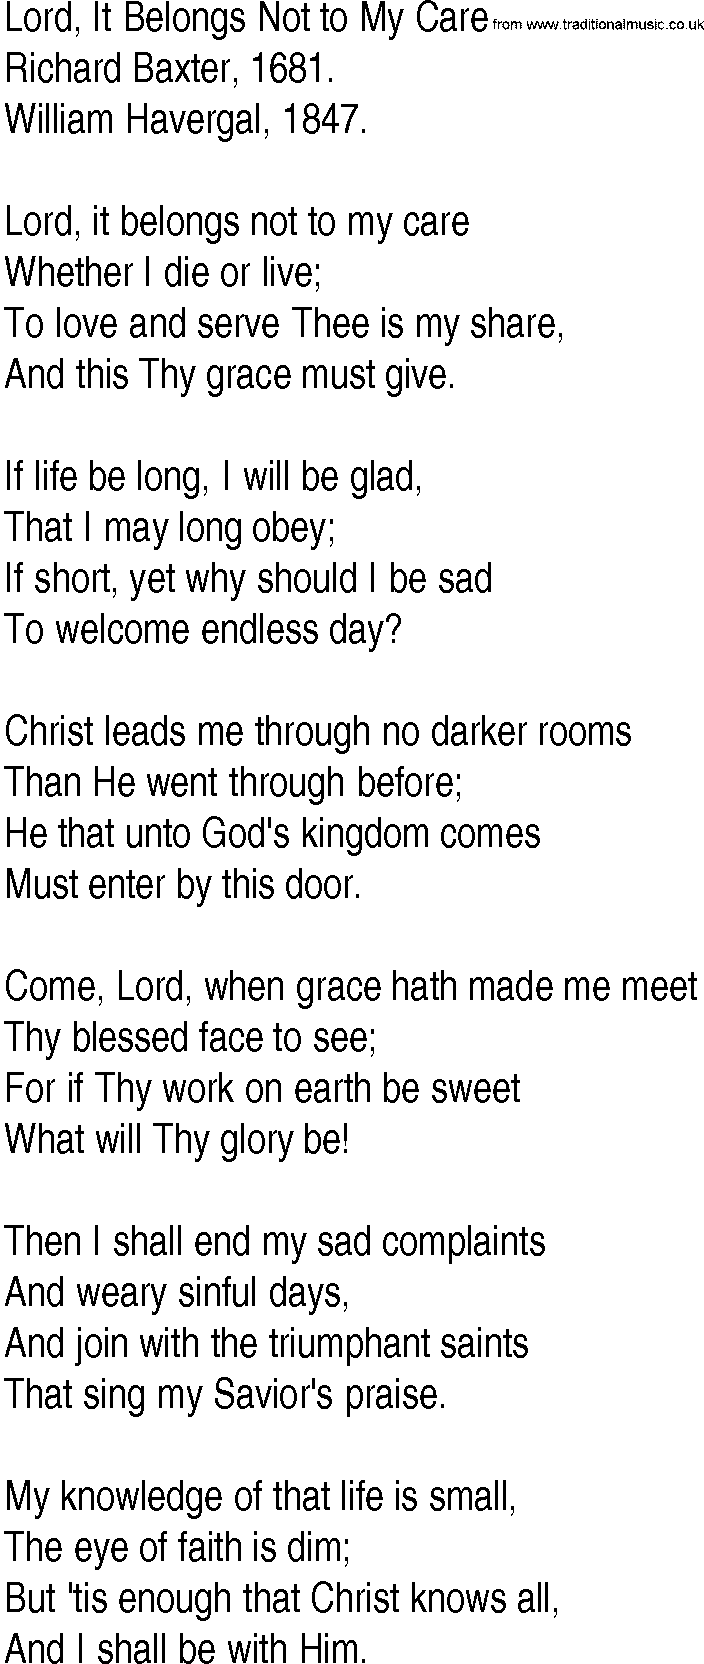 Hymn and Gospel Song: Lord, It Belongs Not to My Care by Richard Baxter lyrics